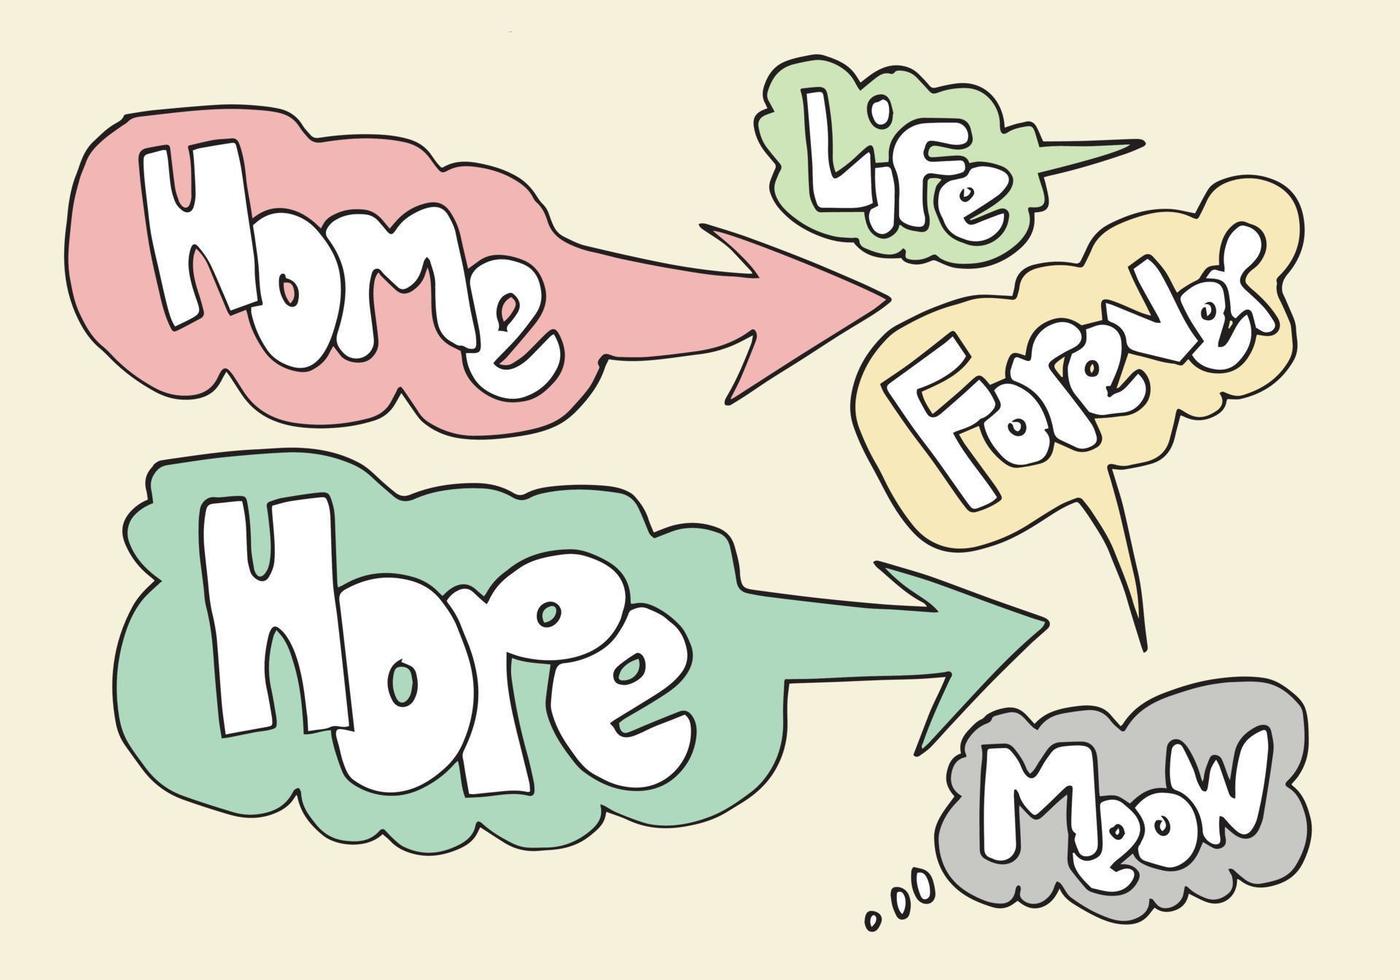 Handdrawn arrows, borders set with handwritten texthome,hope,life,forever,meow. Vector icon.